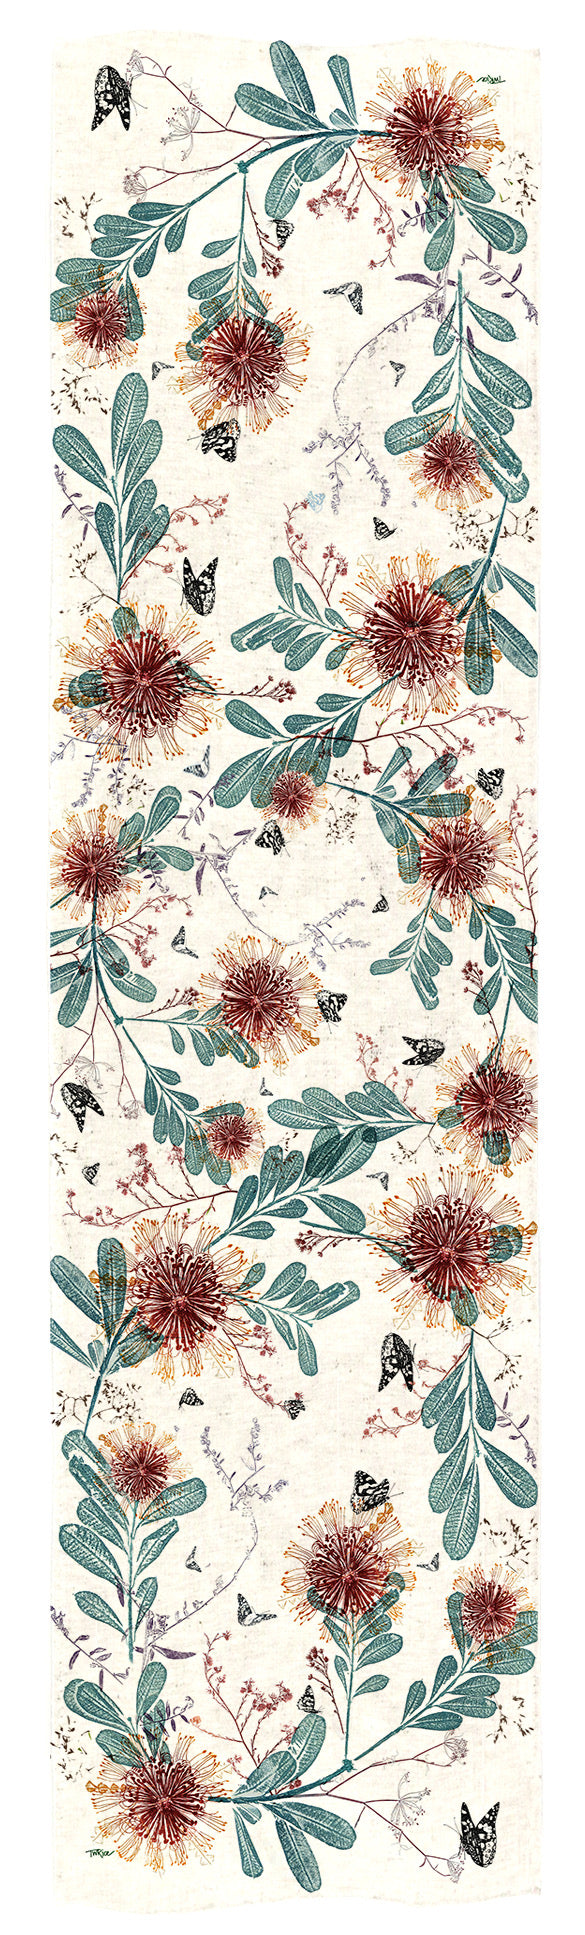 Butterflies & Banksia ECO Table Runner: Bring the Outdoors into your Home (42cm x 160cm)